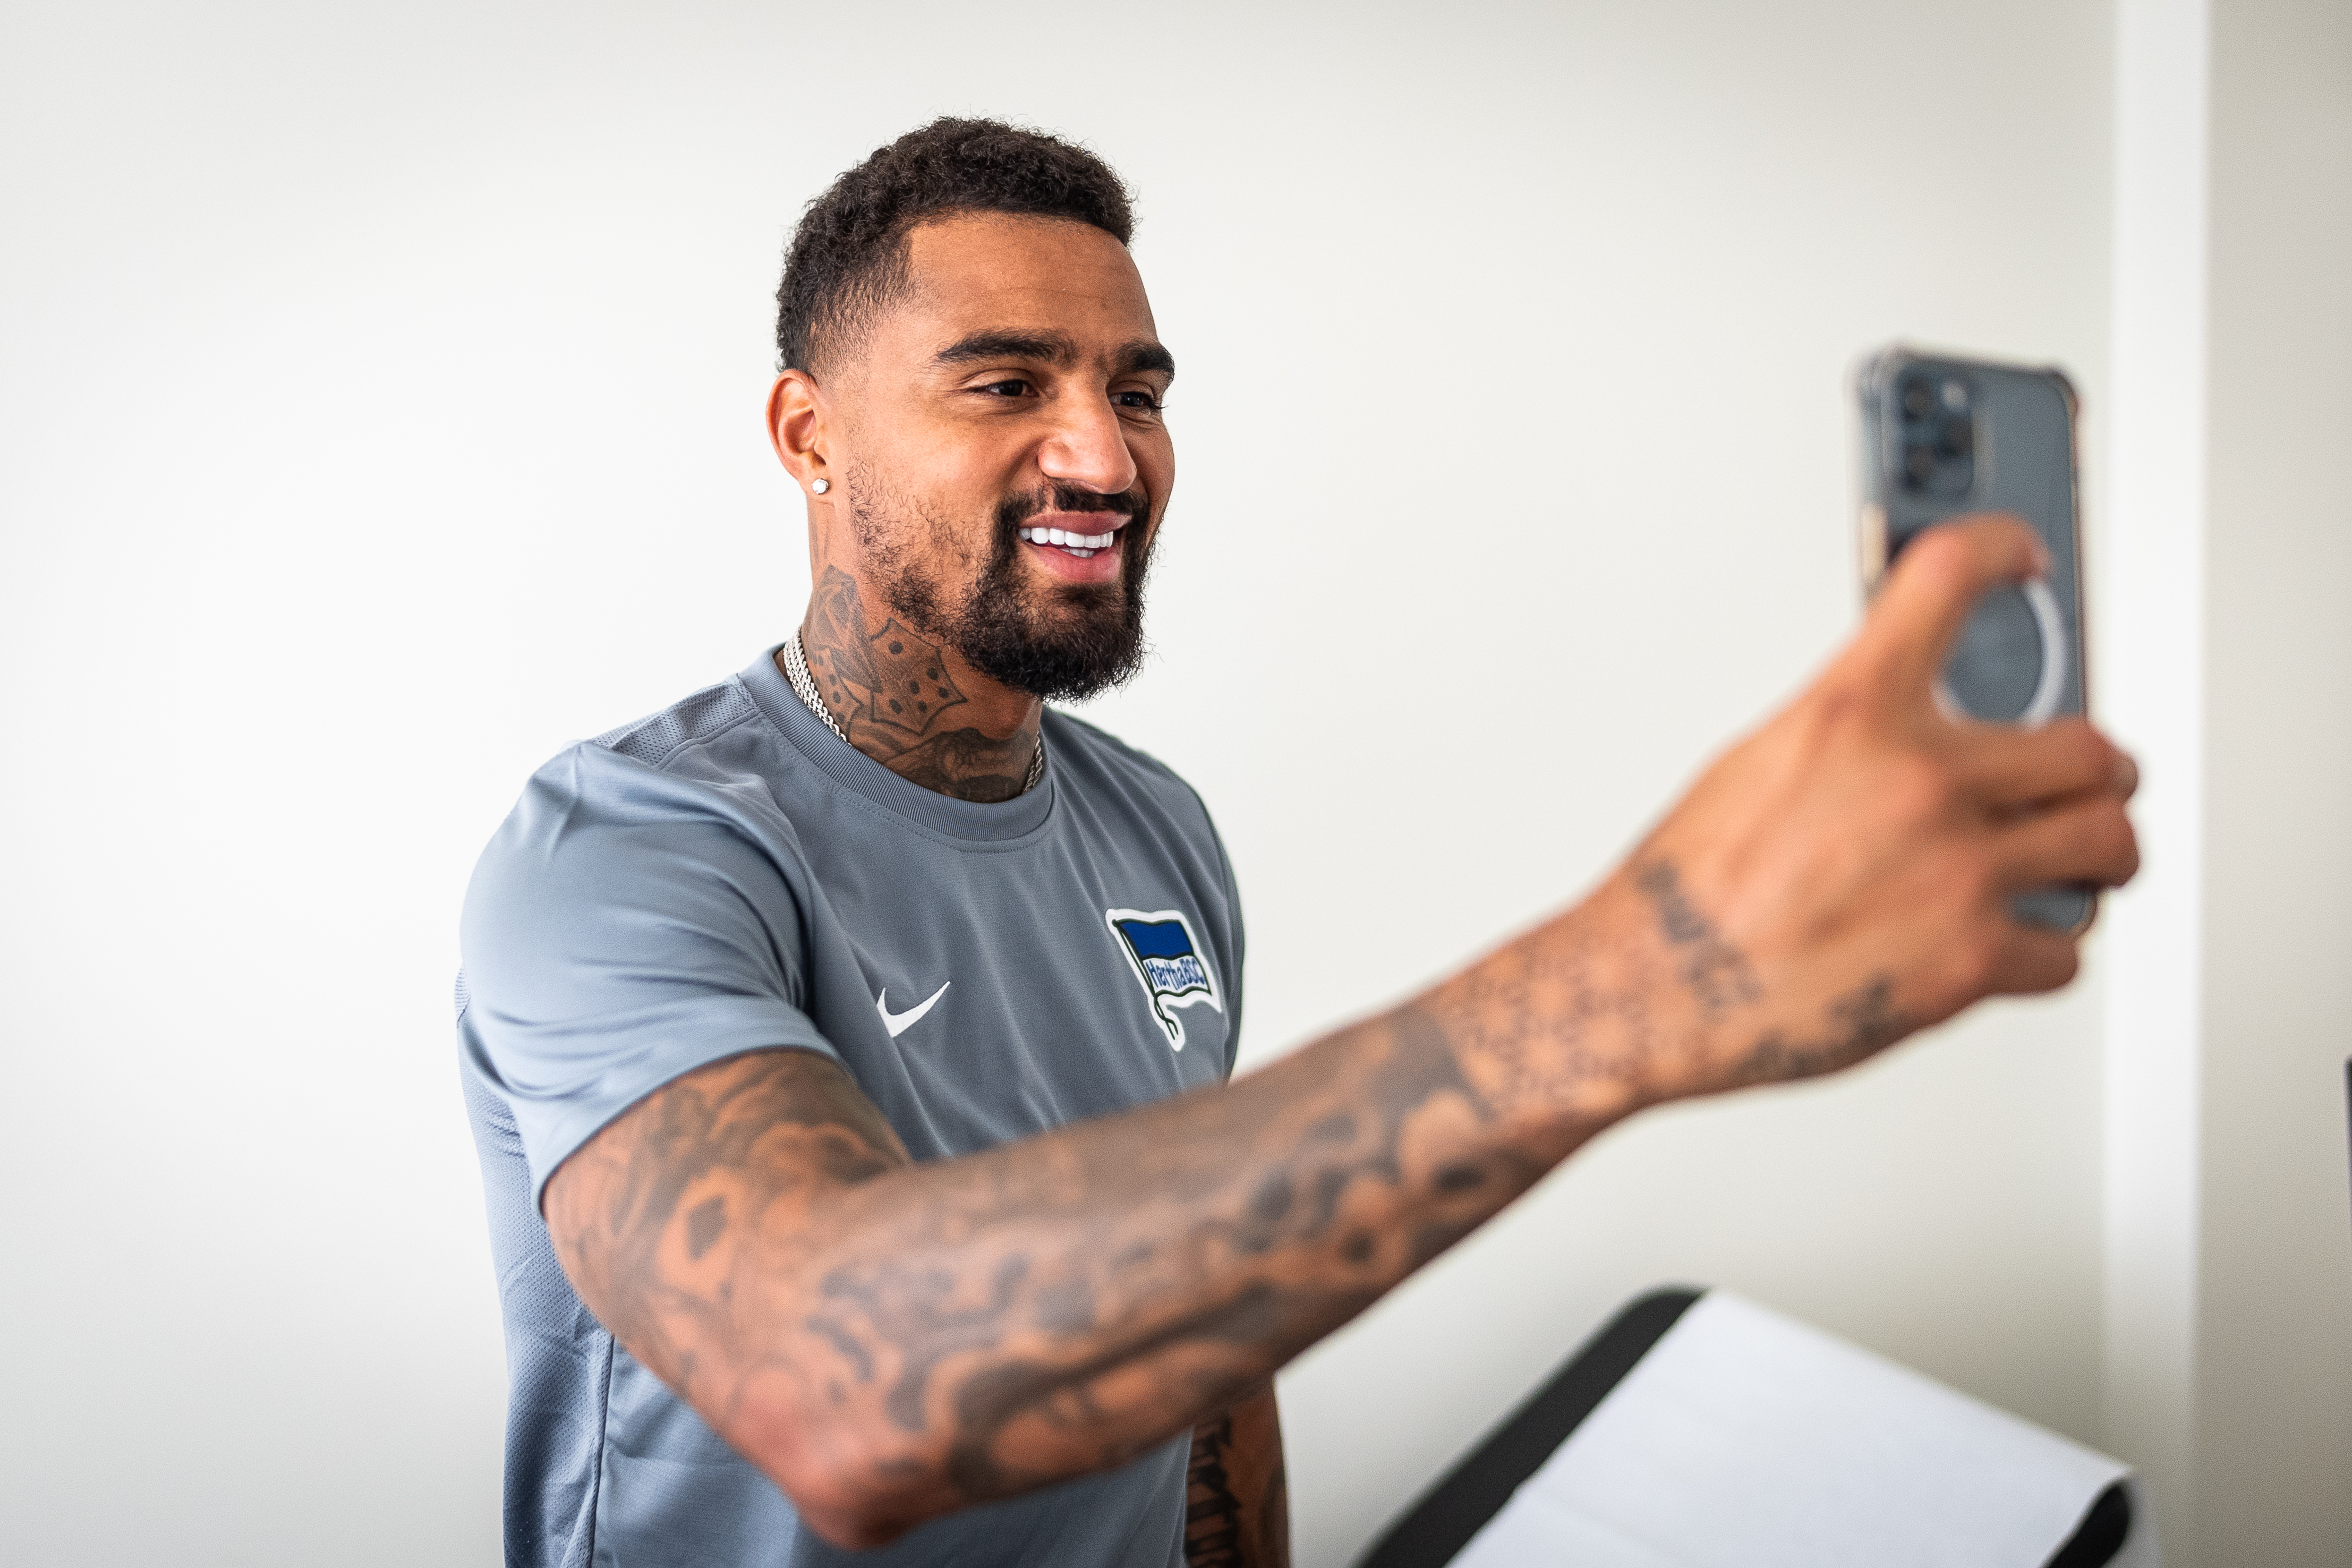 Kevin-Price Boateng takes a photo on his phone.